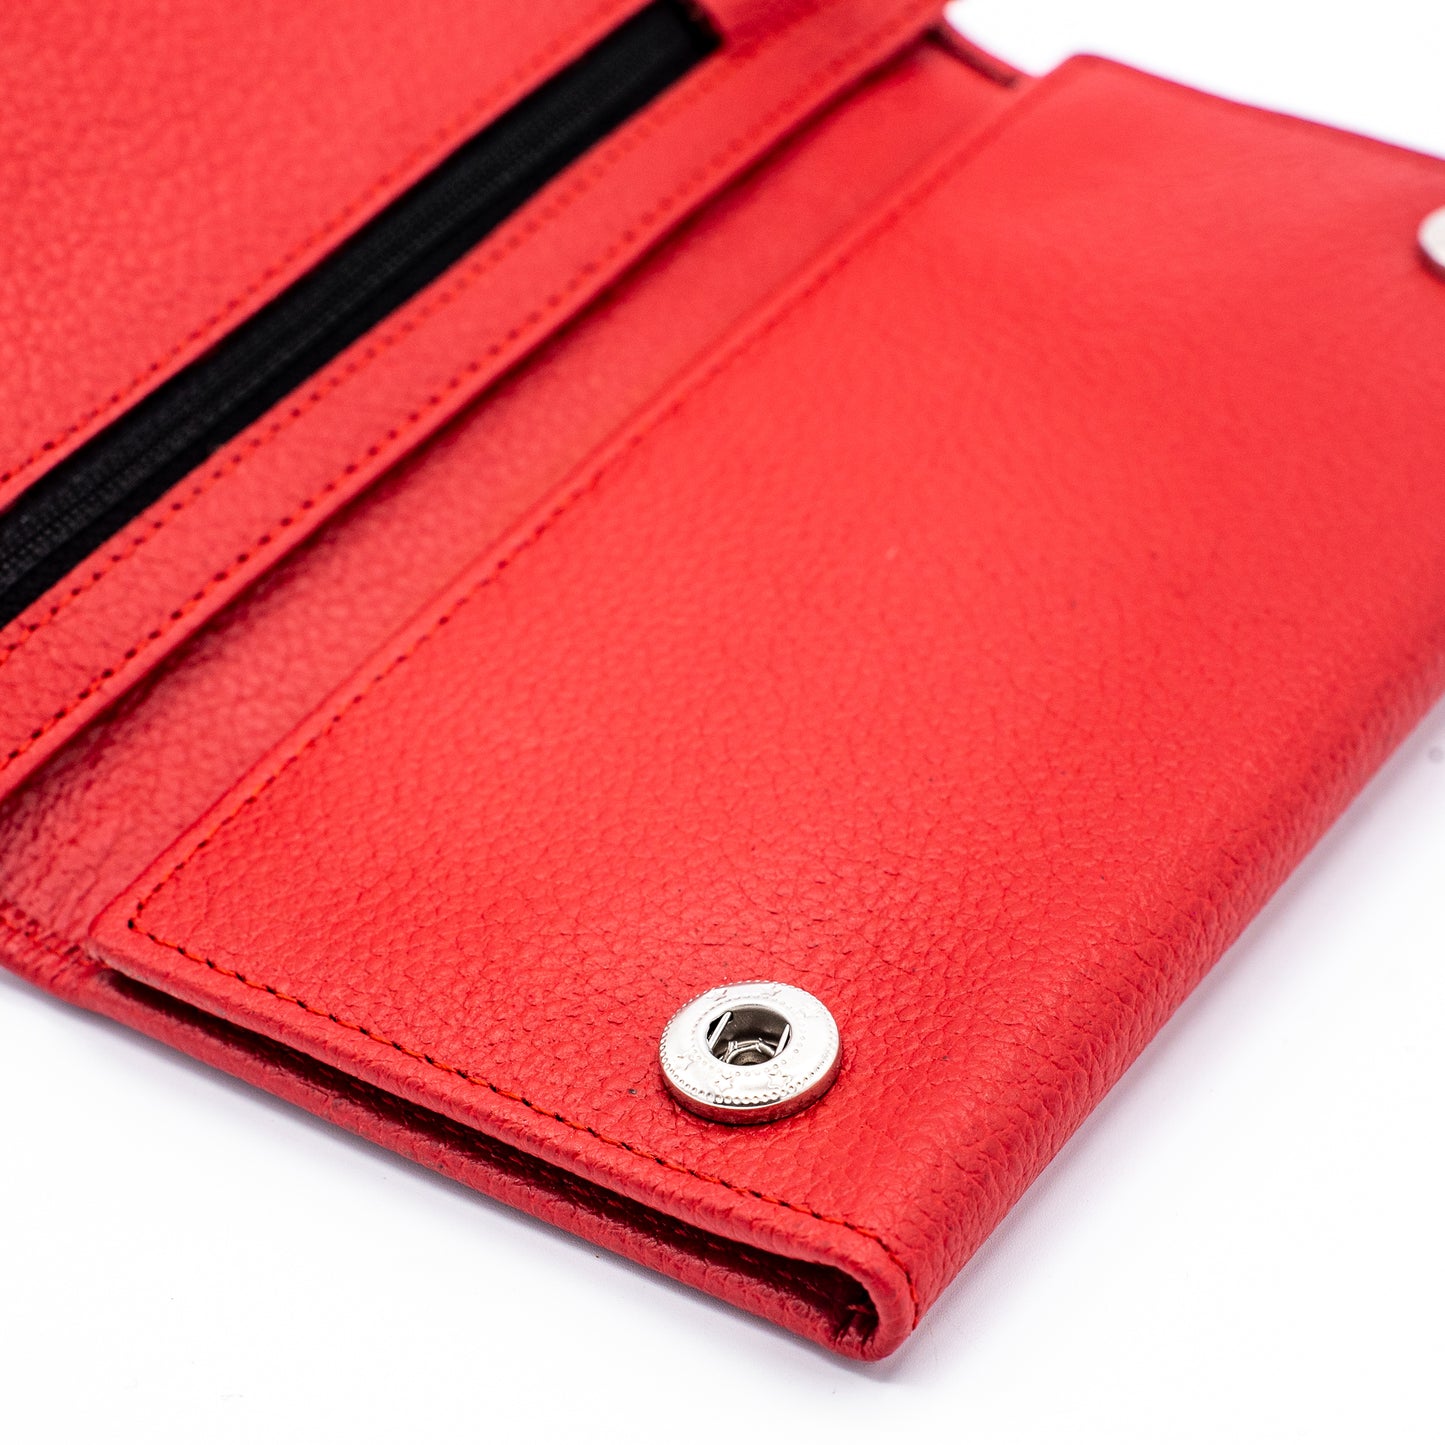 Leather RFID checkbook trifold wallet Red